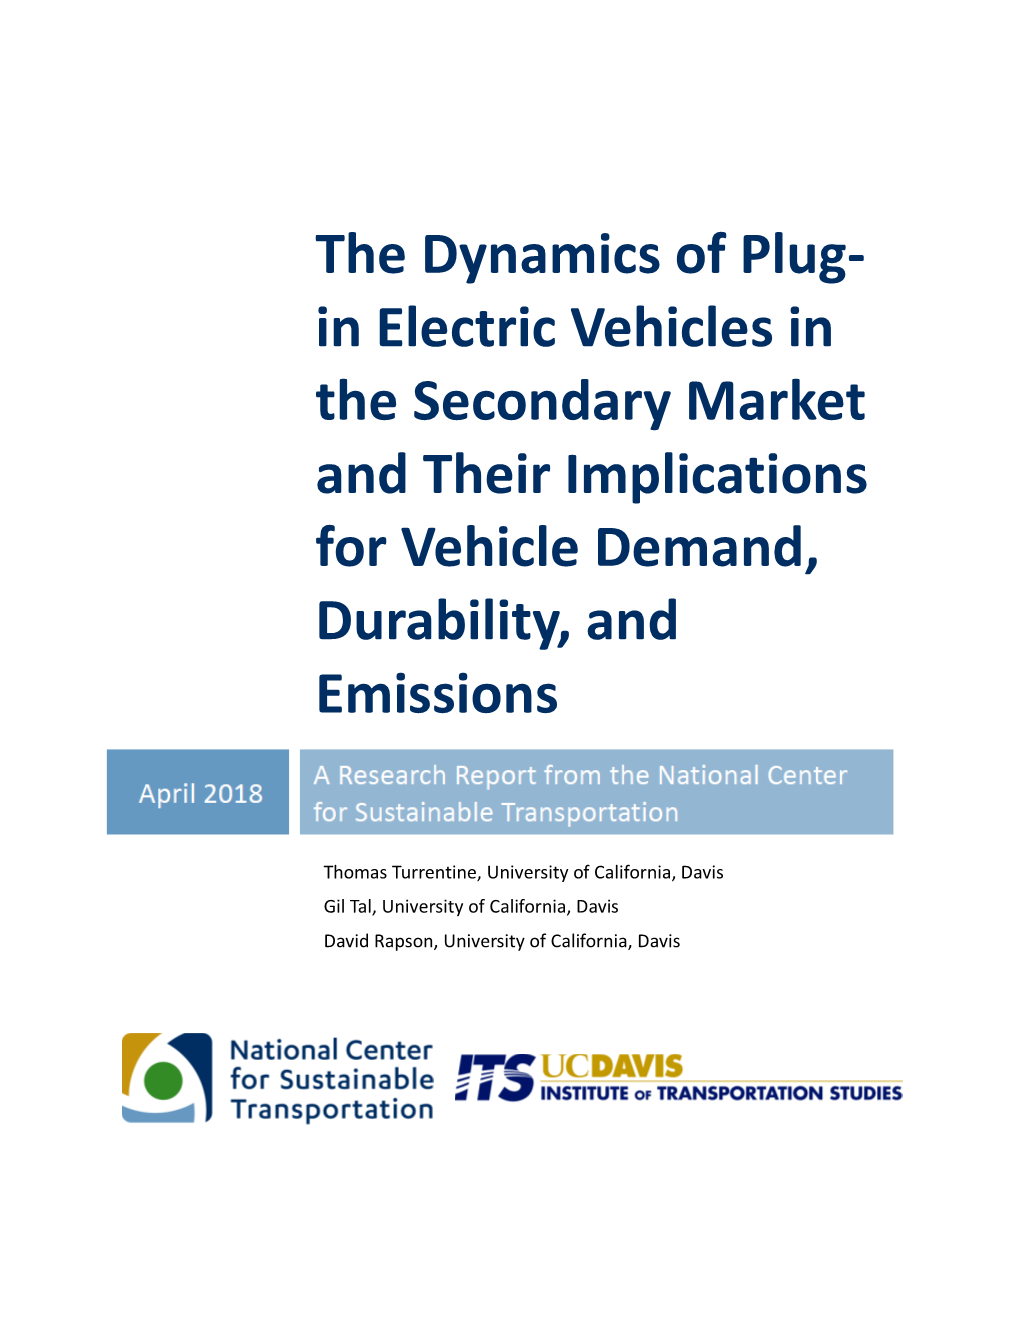 The Dynamics of Plug-In Electric Vehicles in the Secondary Market